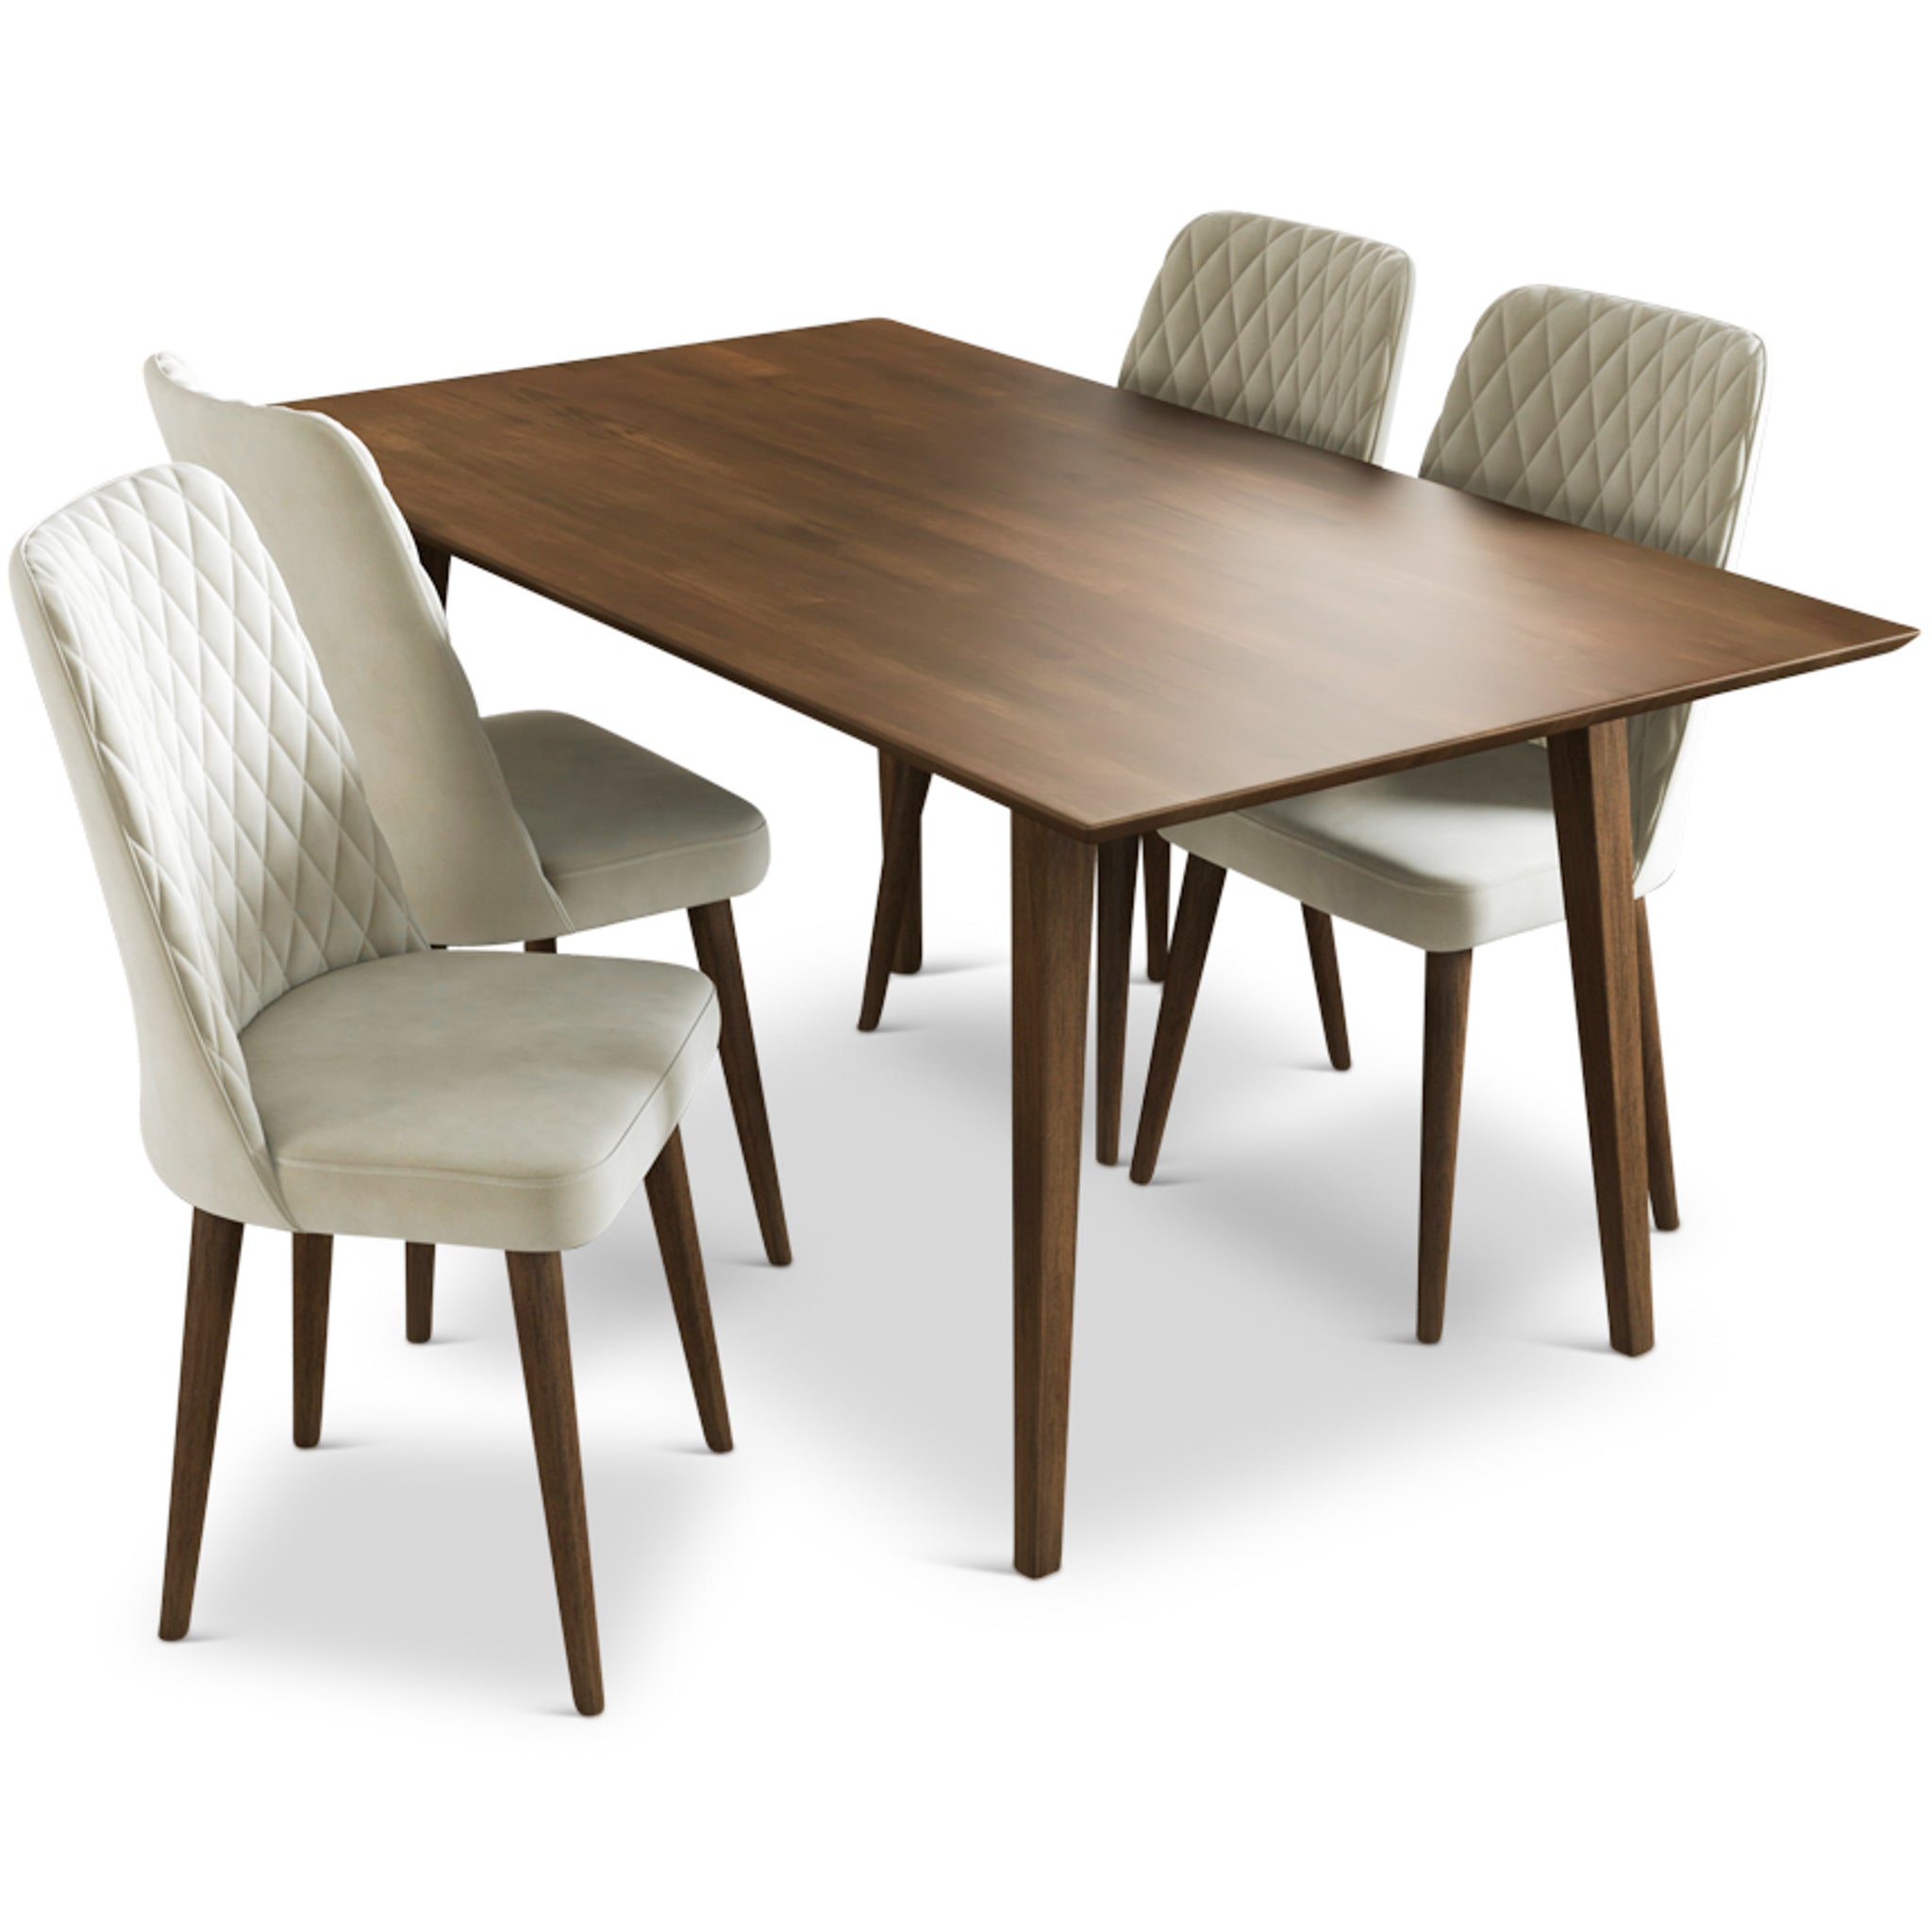 Adira (Large - Walnut) Dining Set with 4 Evette (Beige Velvet) Dining Chairs